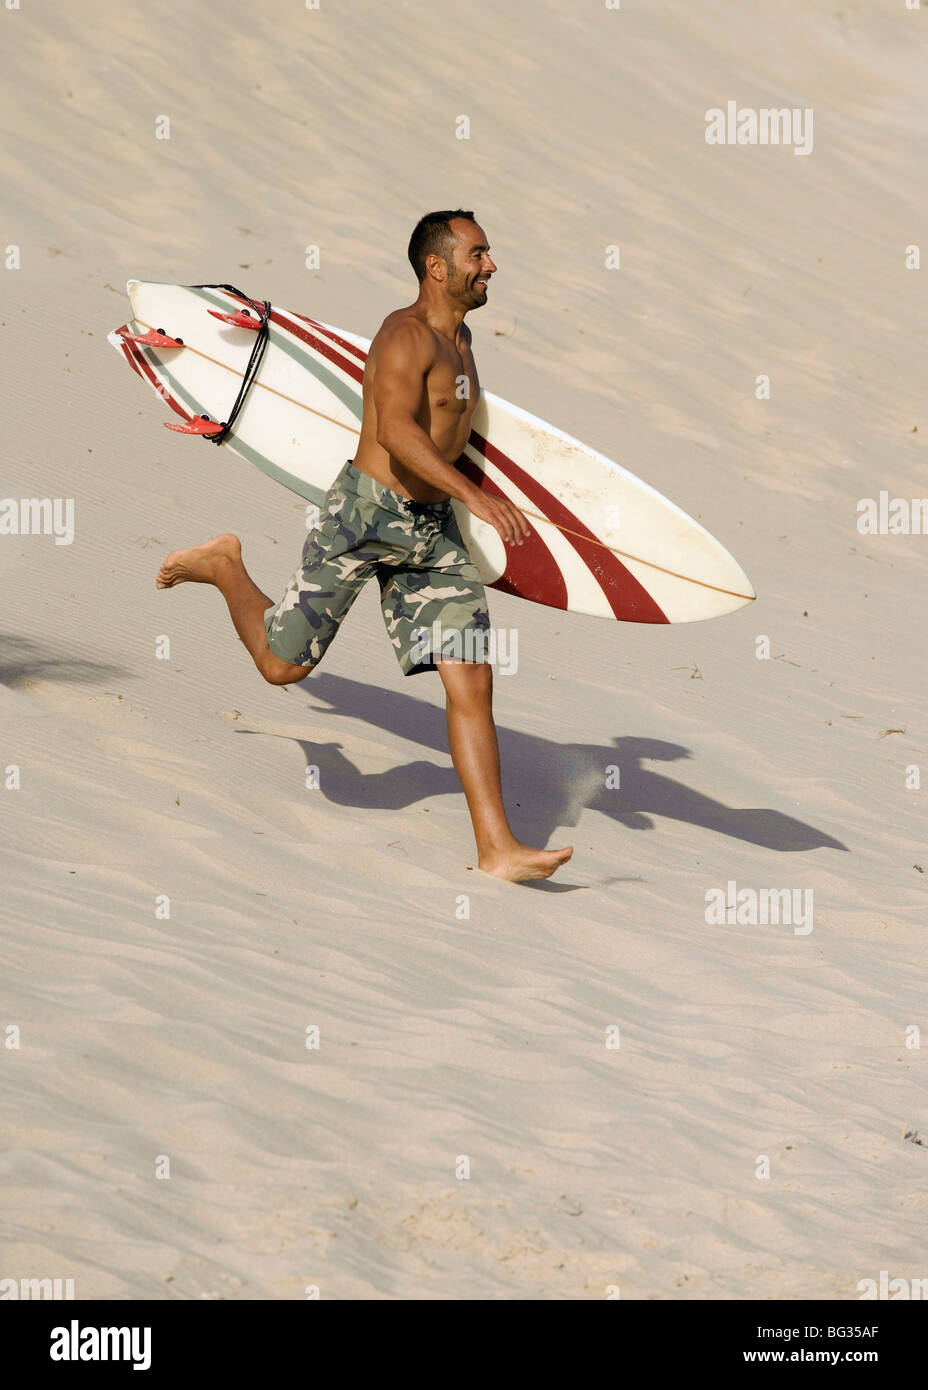 Man running with a surfboard on the beach Stock Photo